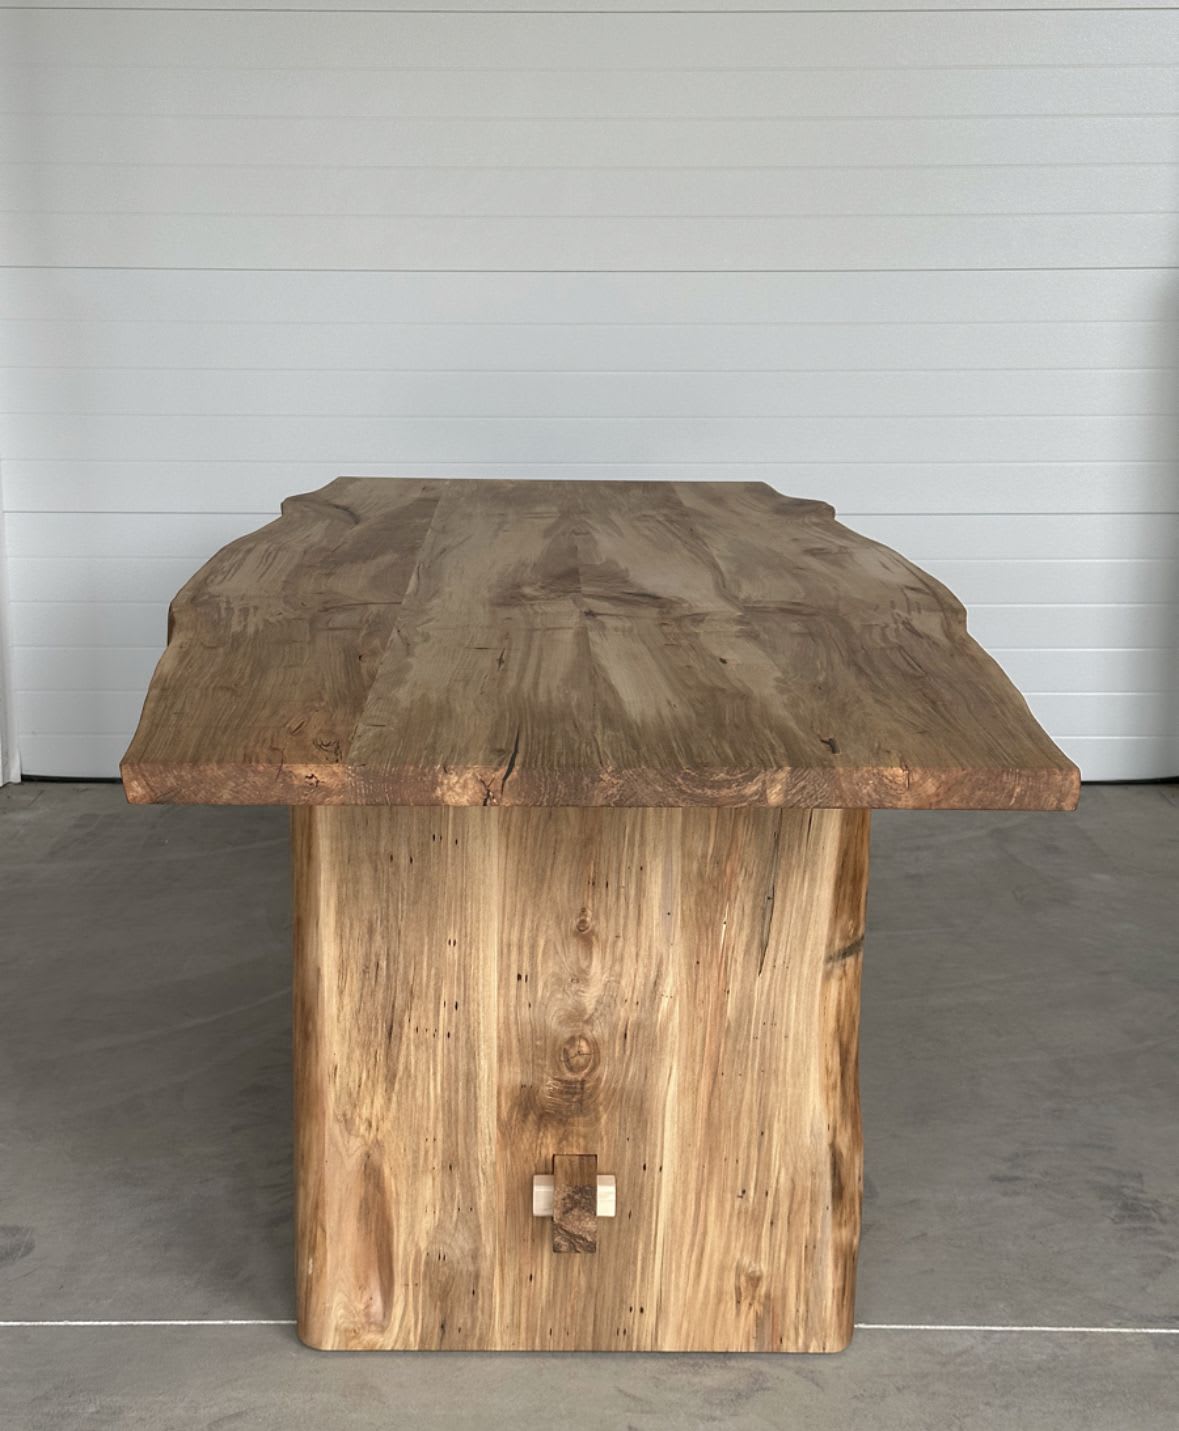 Wood Table Tops  Build Unique Live Edge Tables - Lumber Shack